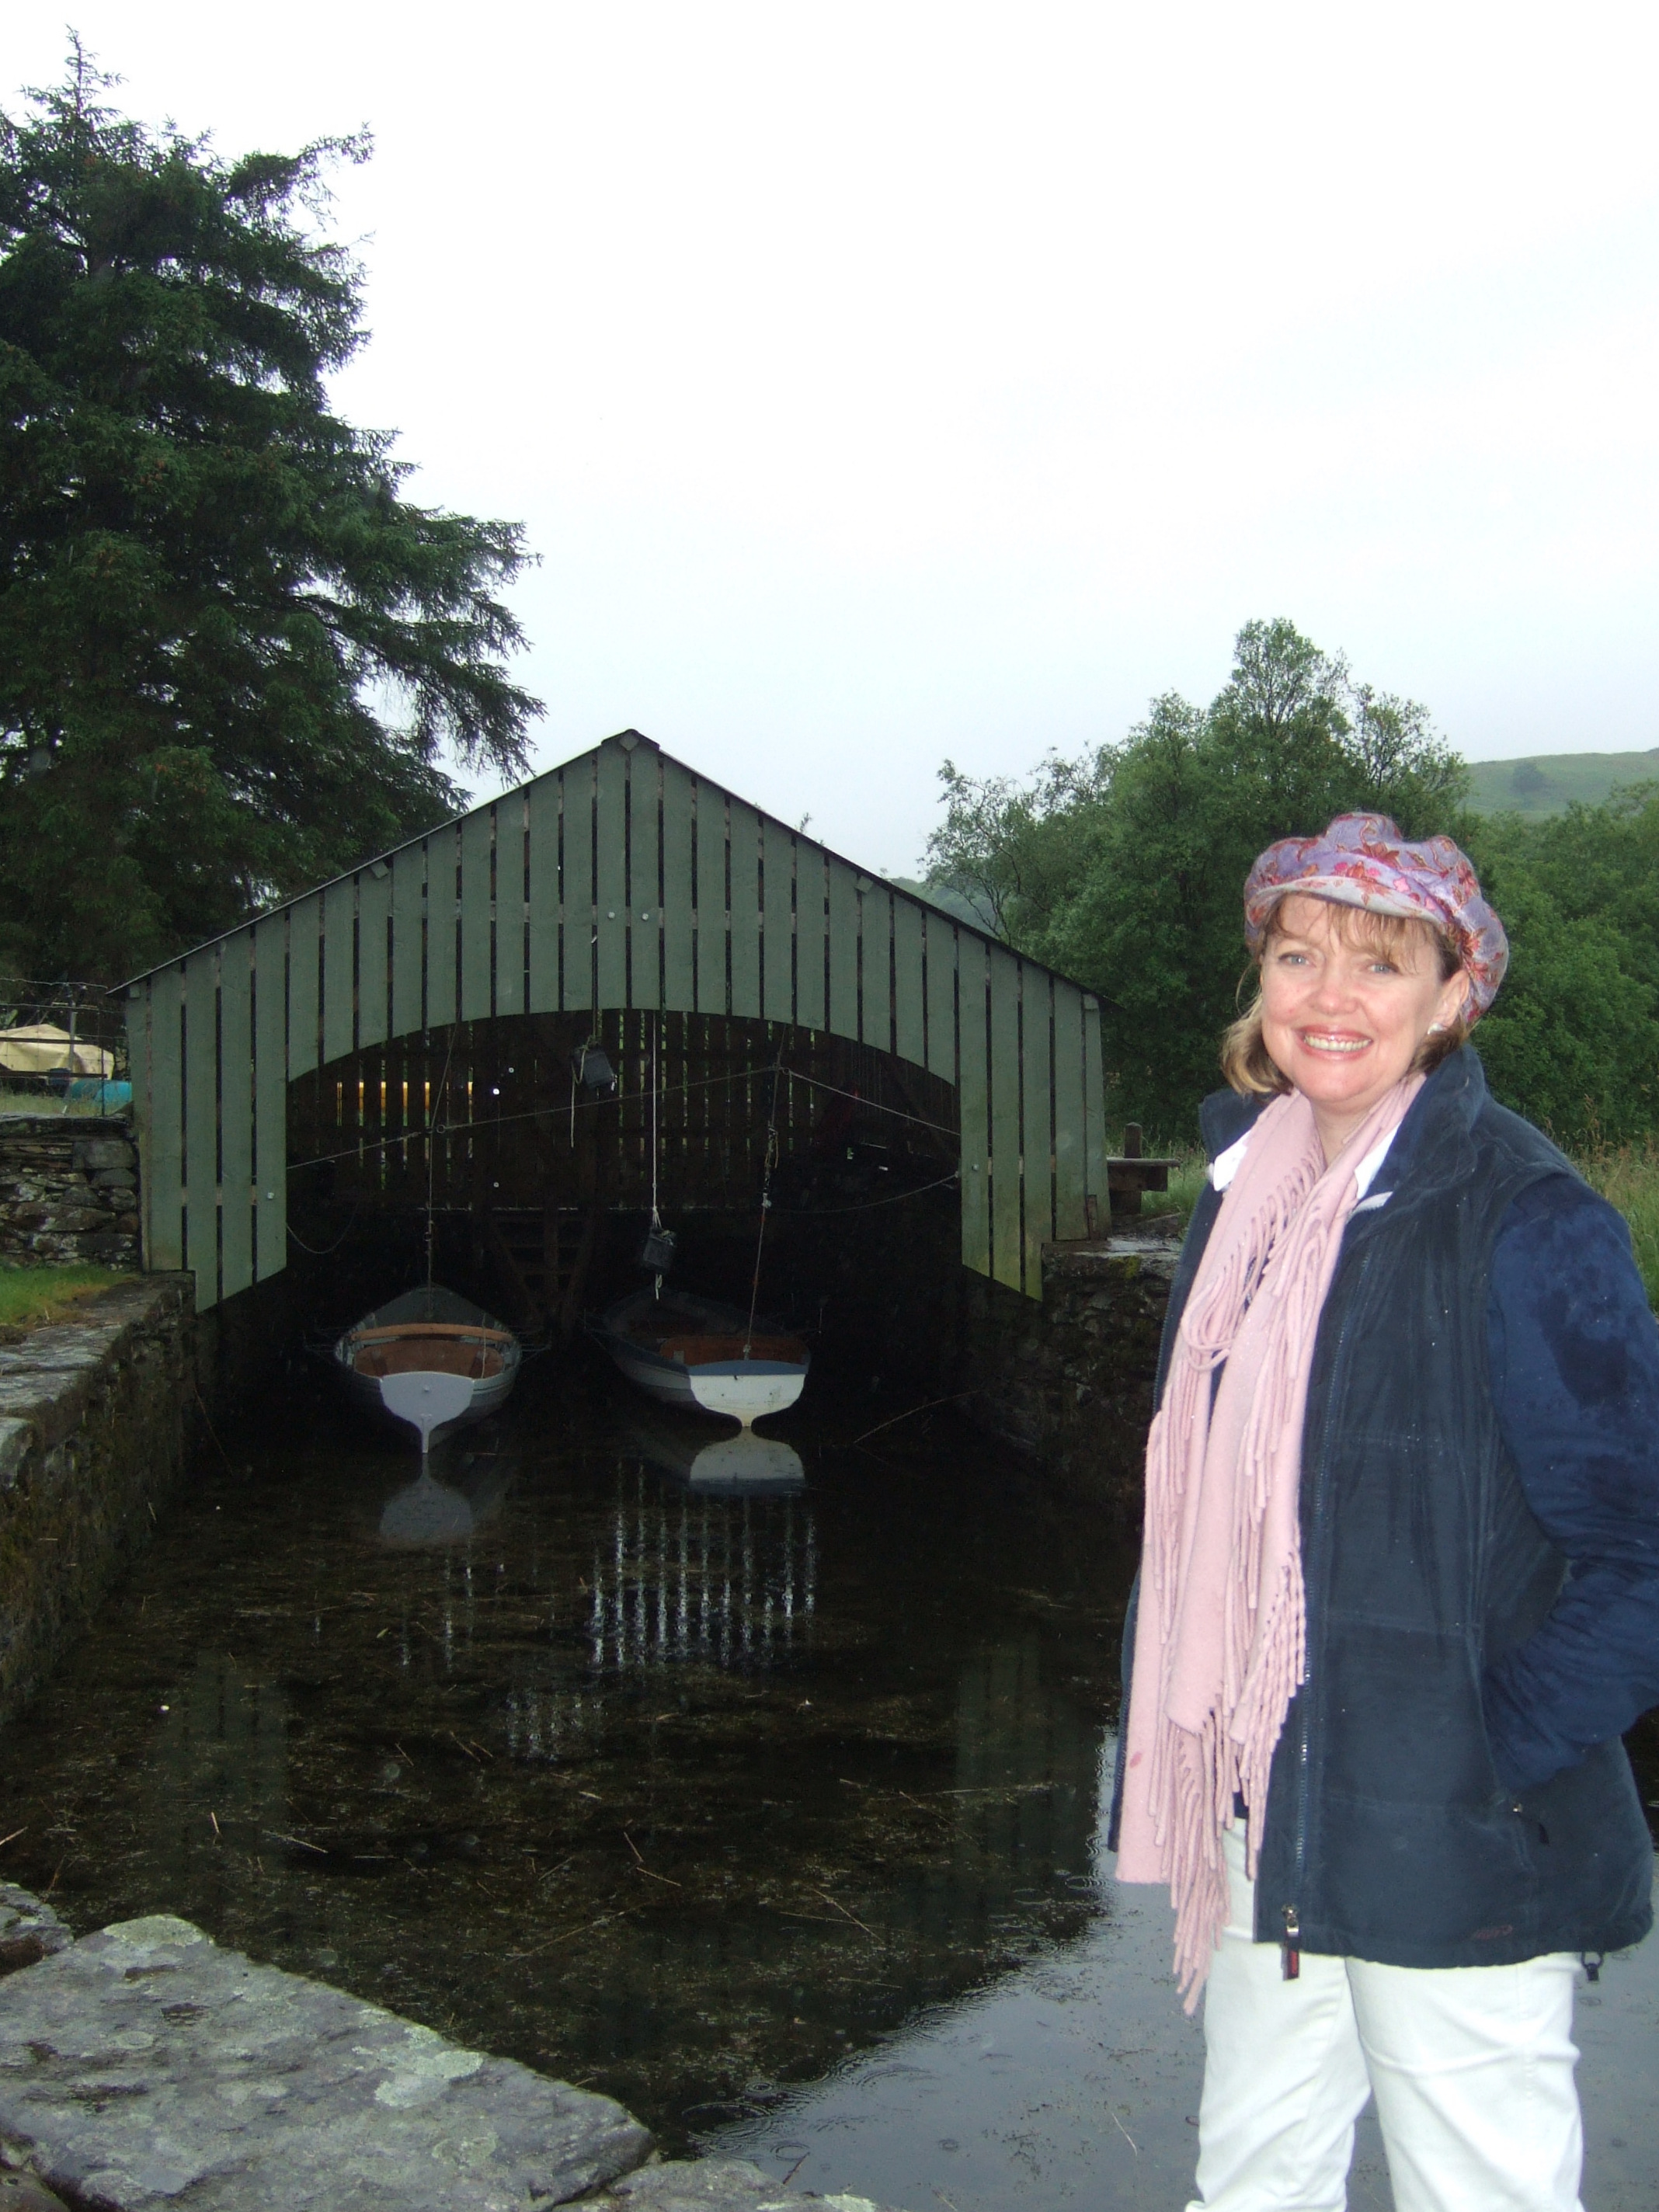 Sophie Neville, author of the filmography 'The making of Swallows & Amazons' visiting locations in the English Lake District